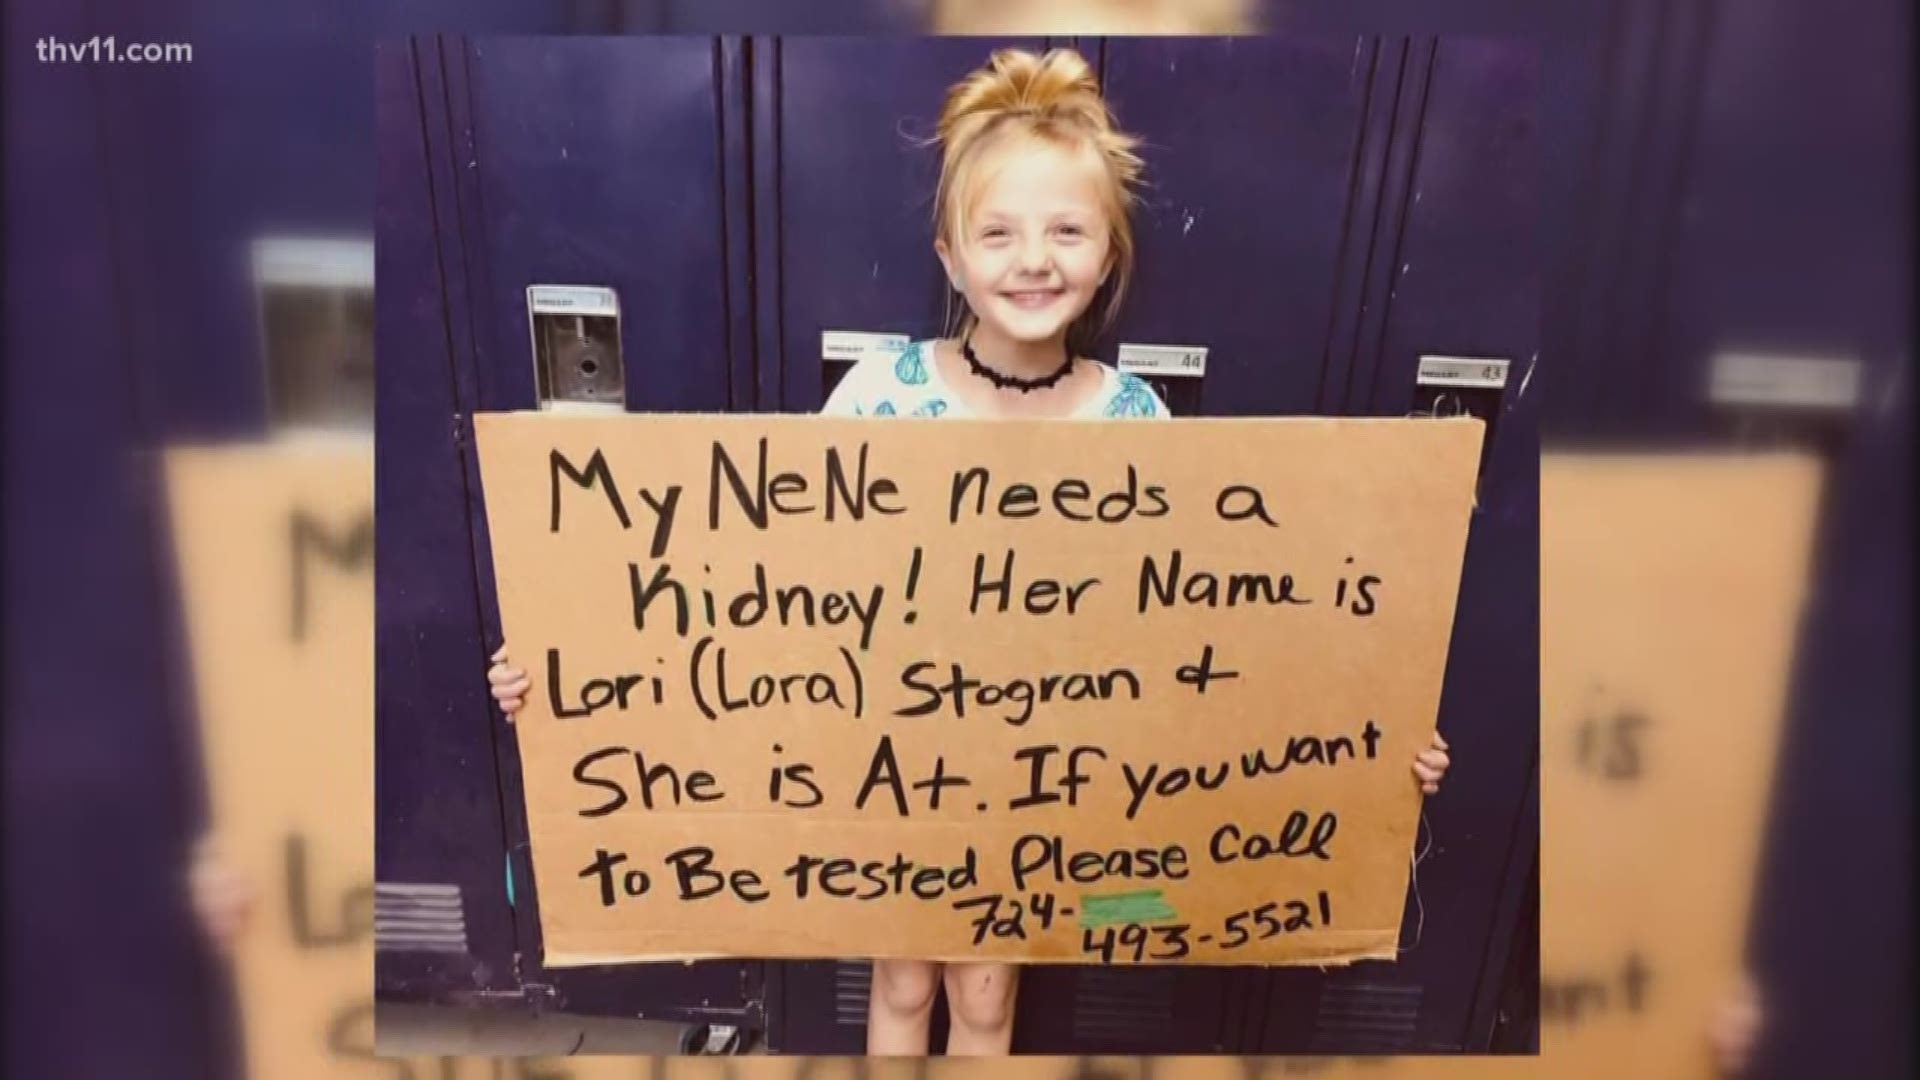 A central Arkansas girl puts out a desperate plea on social media to help find an organ donor for her grandmother.